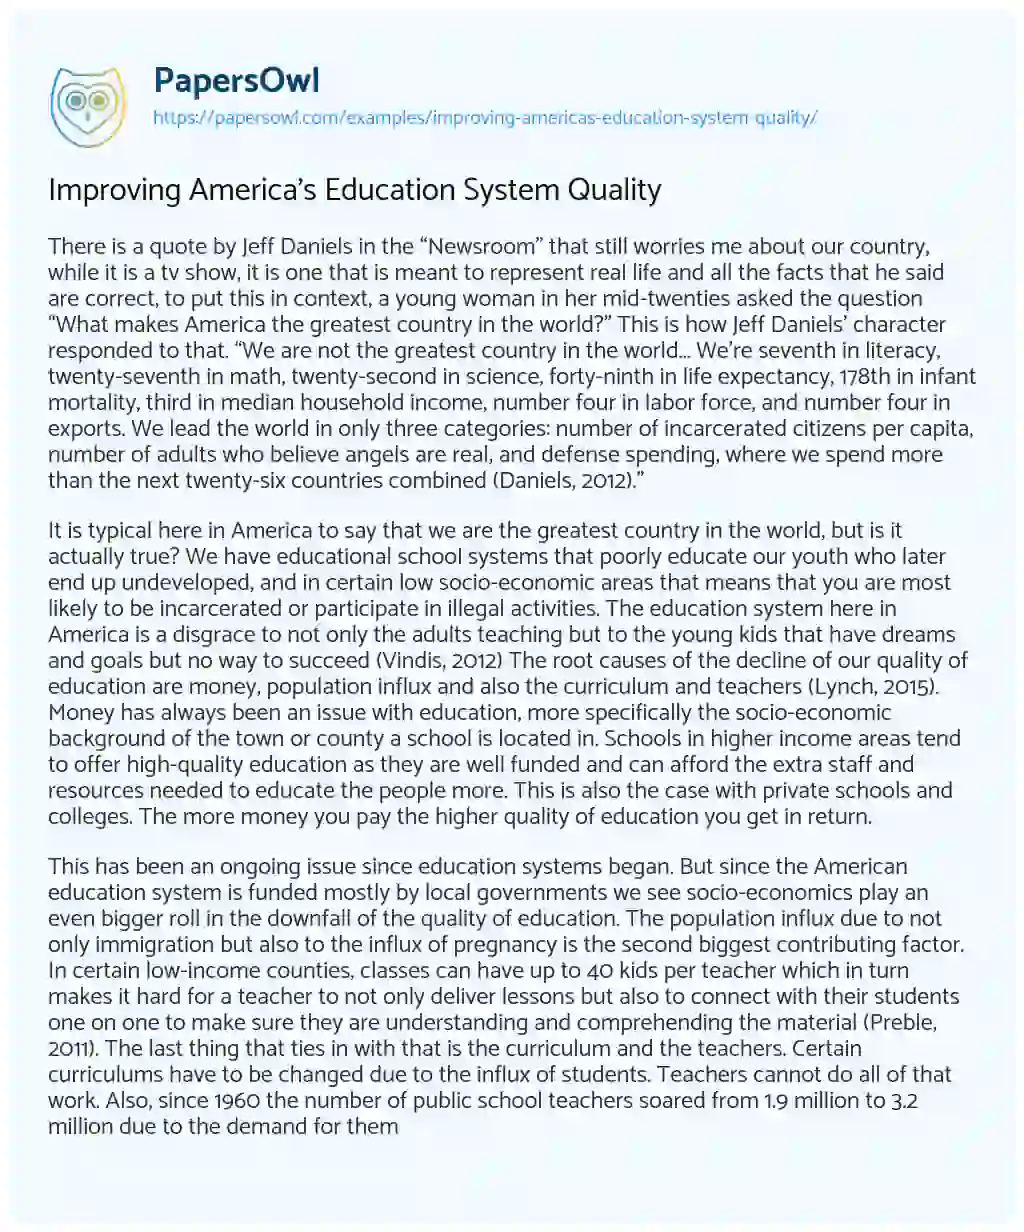 Essay on Improving America’s Education System Quality